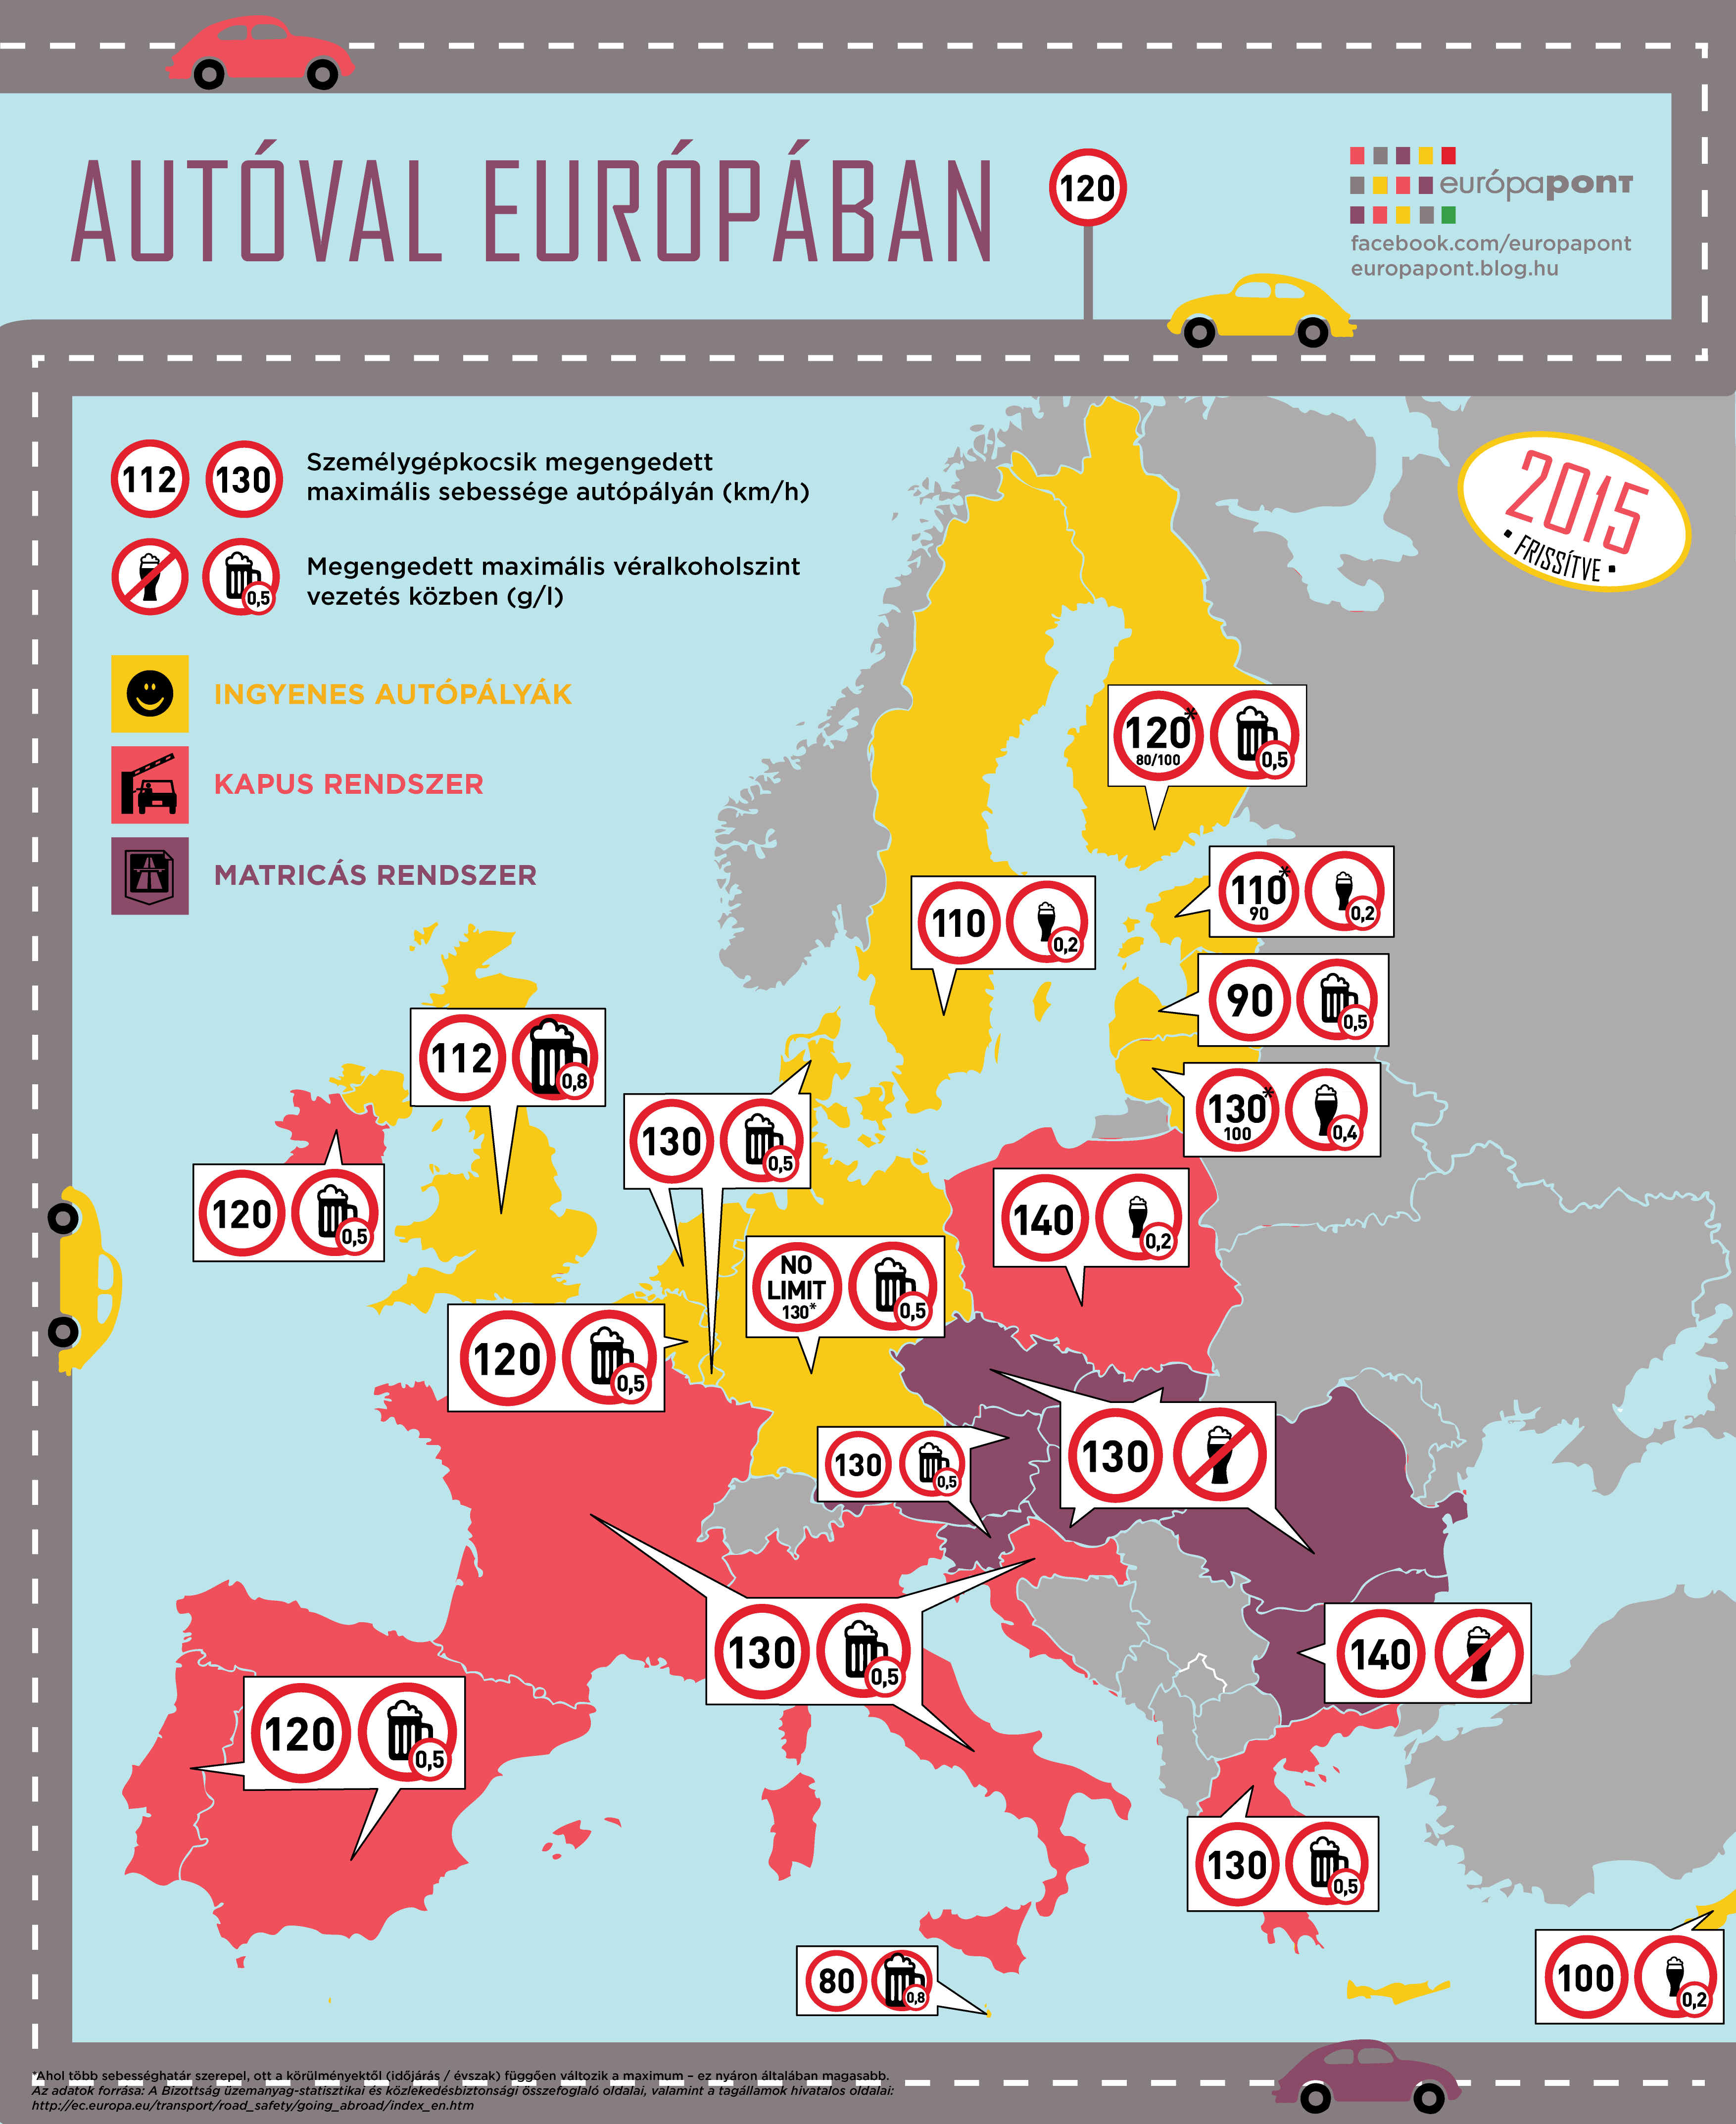 autoval_europaban_2015-01.png